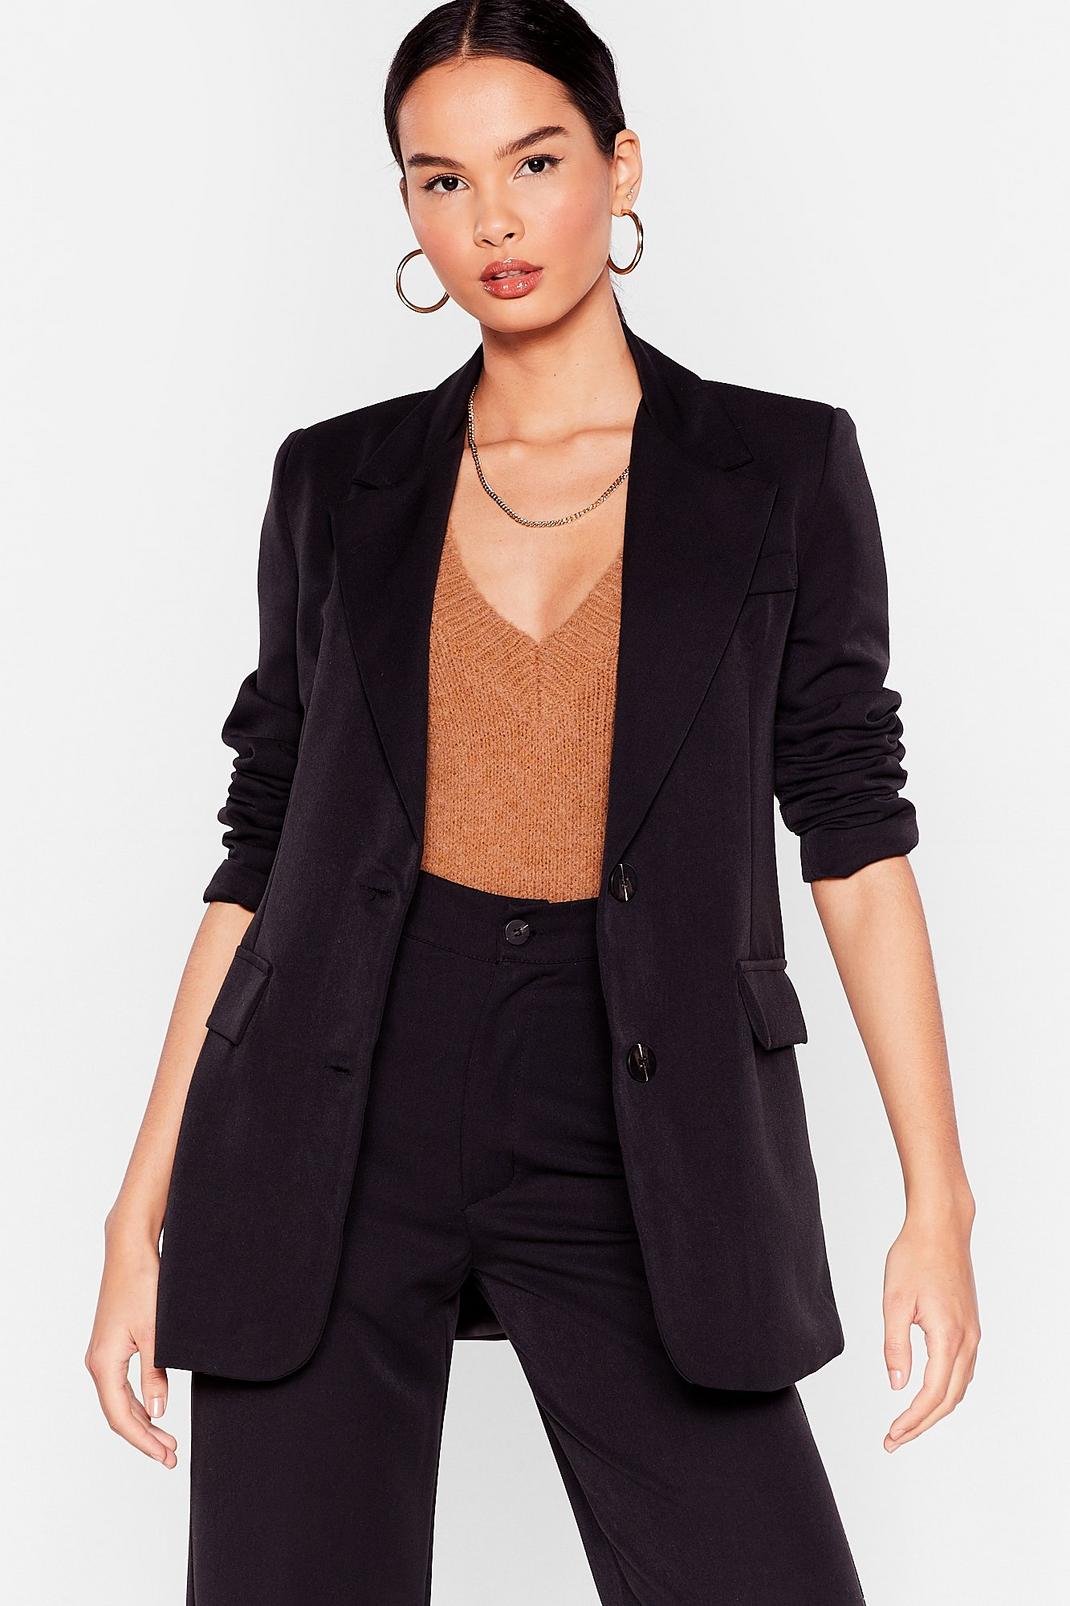 Flared Trouser Suit